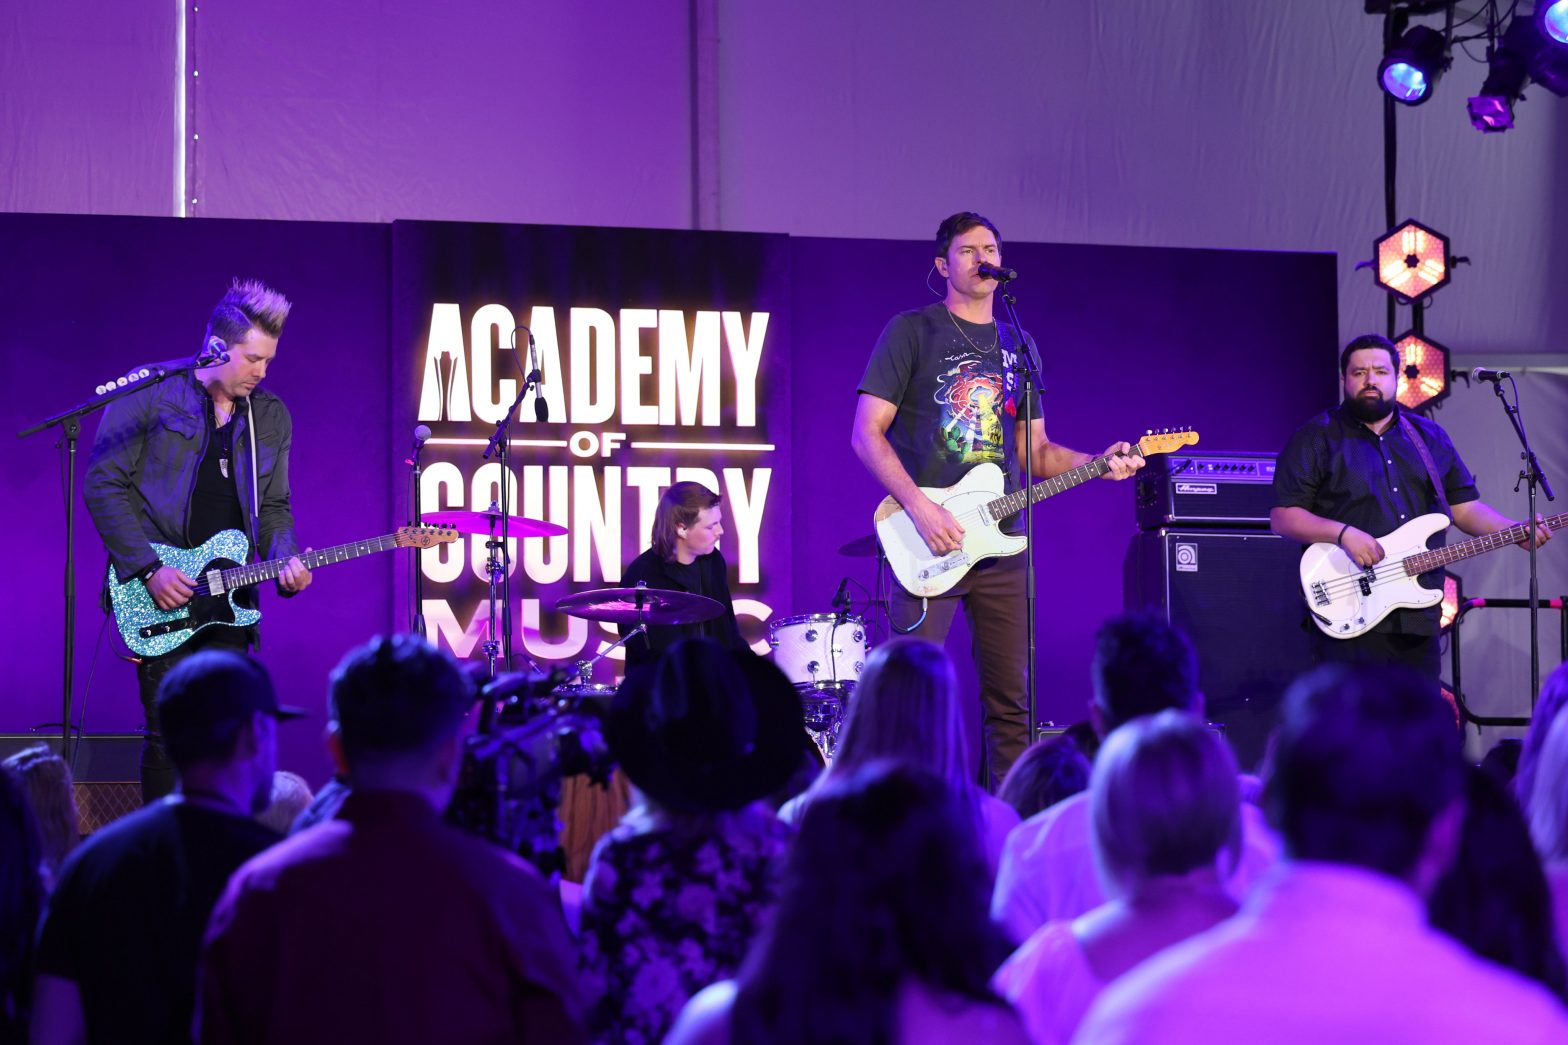 Academy of Country Music Awards 2023: When and where to watch, venue, hosts, time, key performances and more